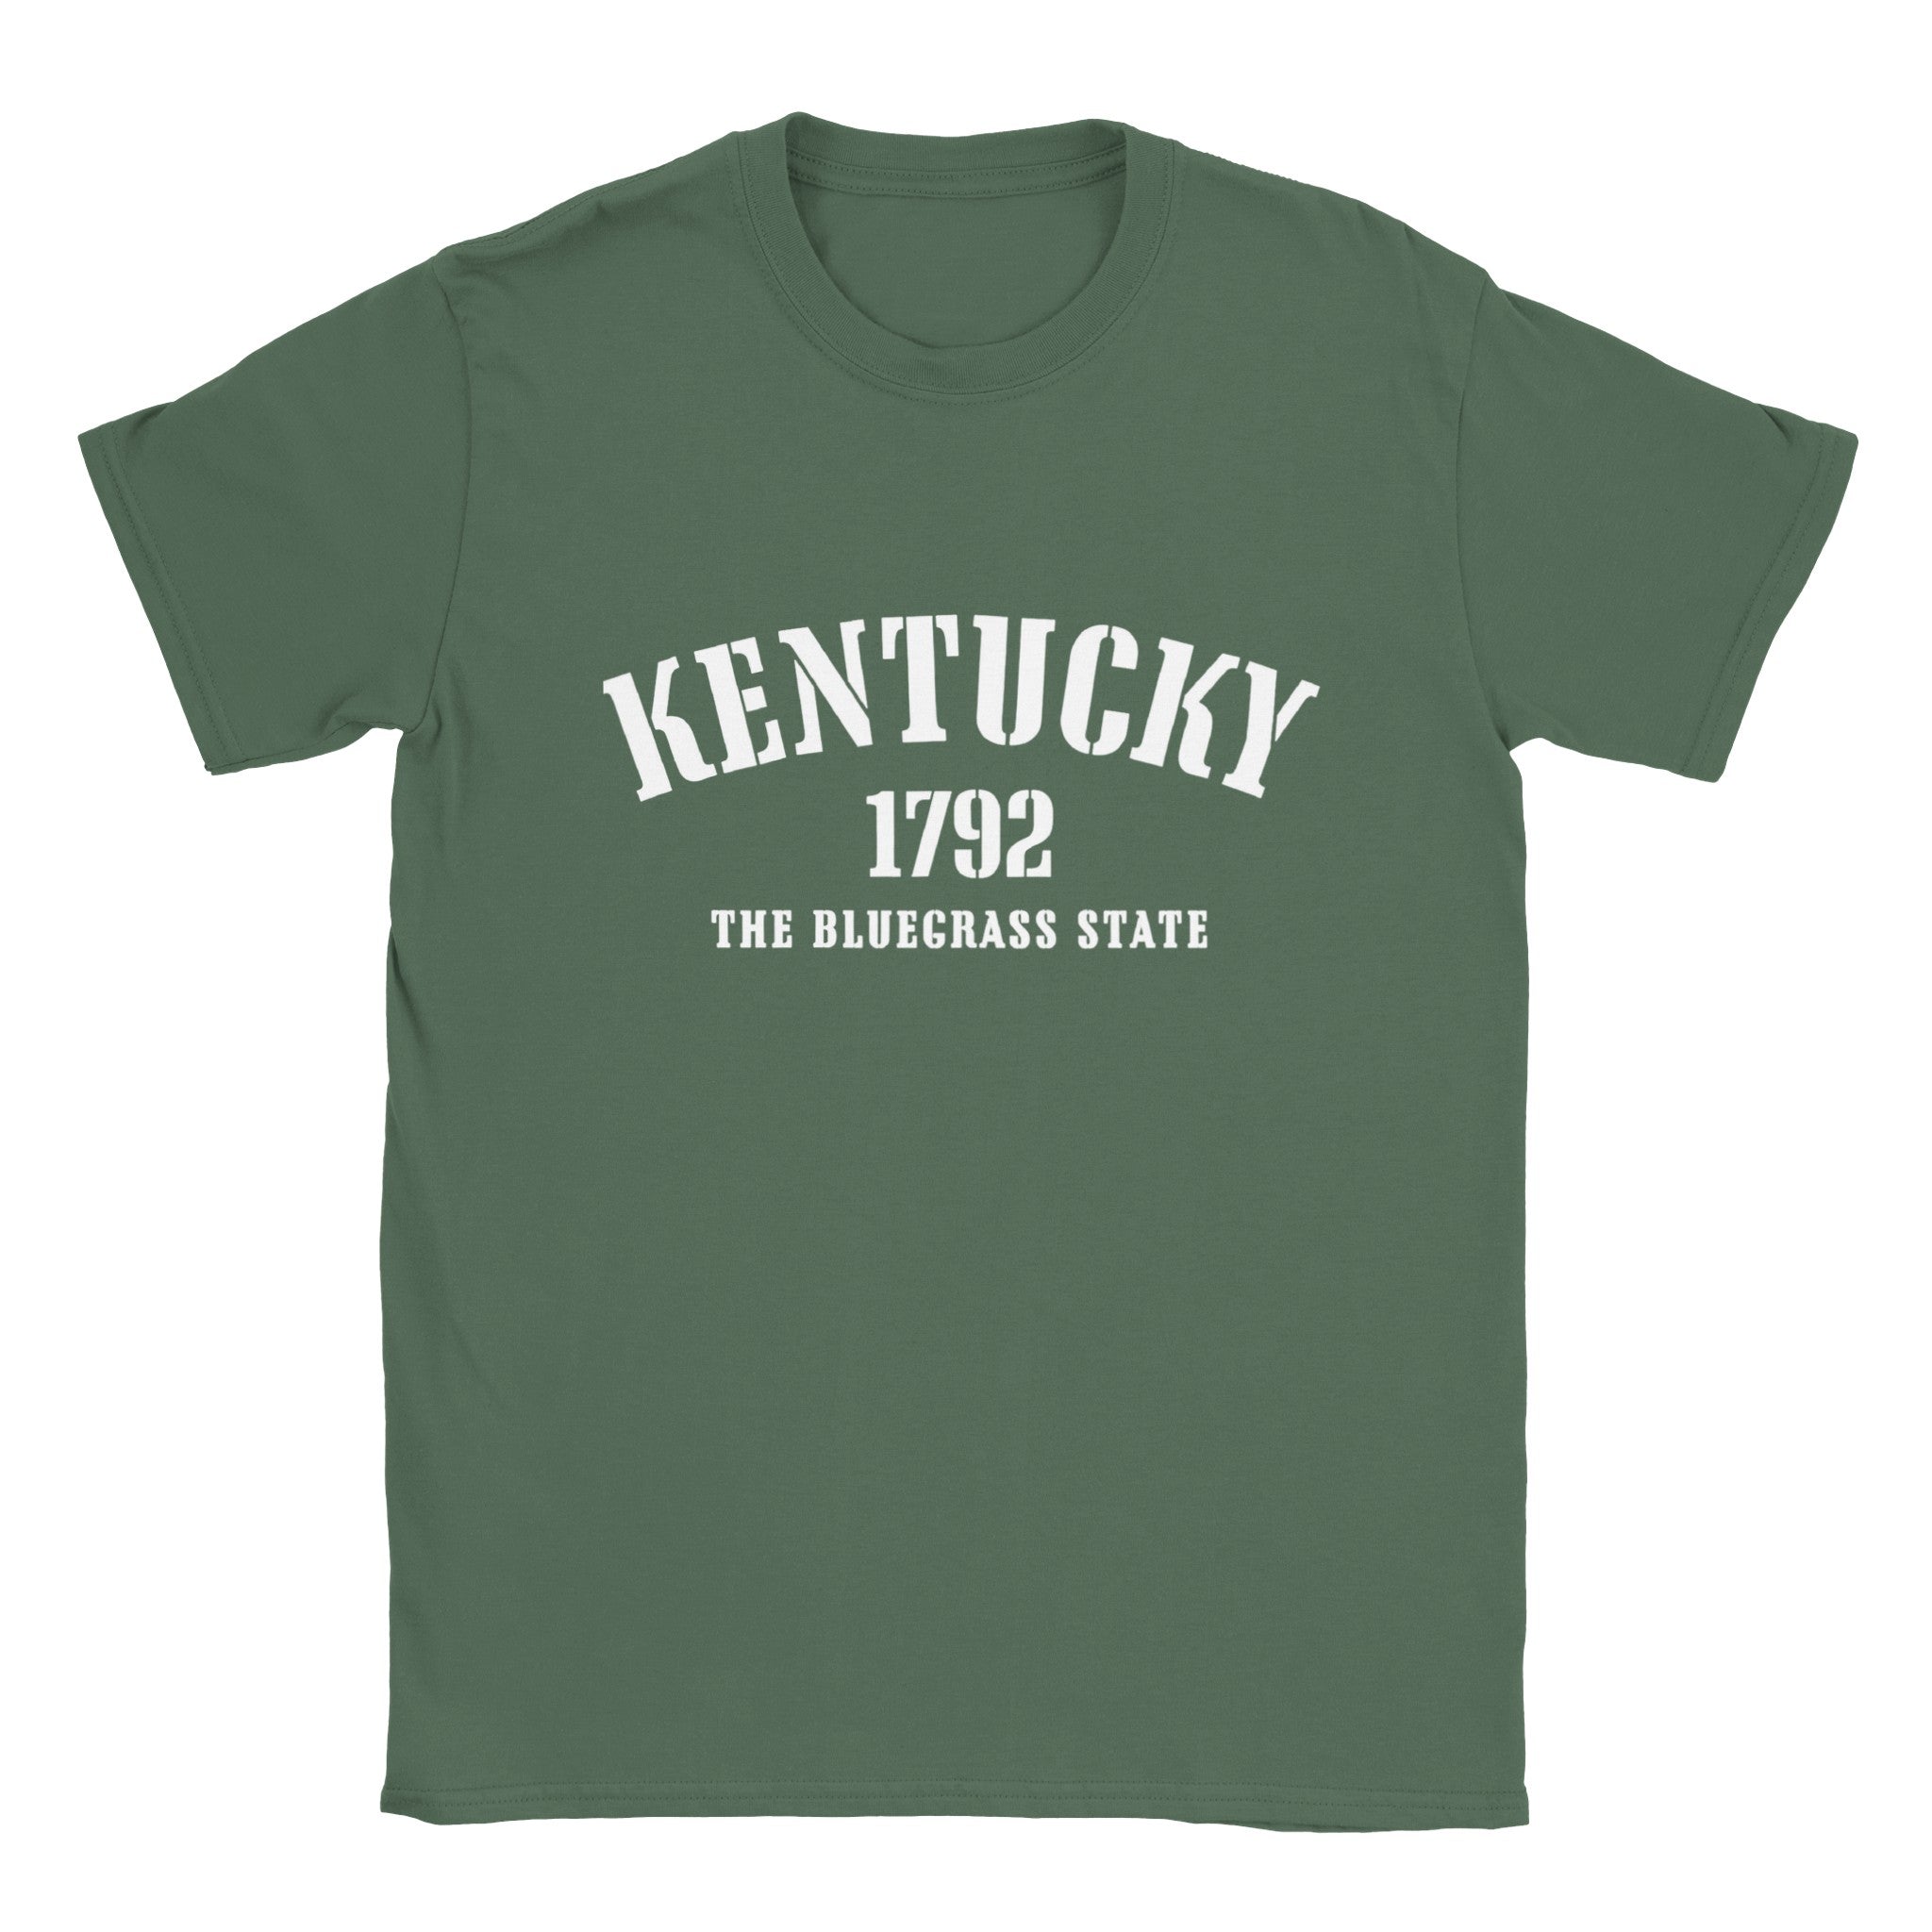 Kentucky- Classic Unisex Crewneck States T-shirt - Creations by Chris and Carlos